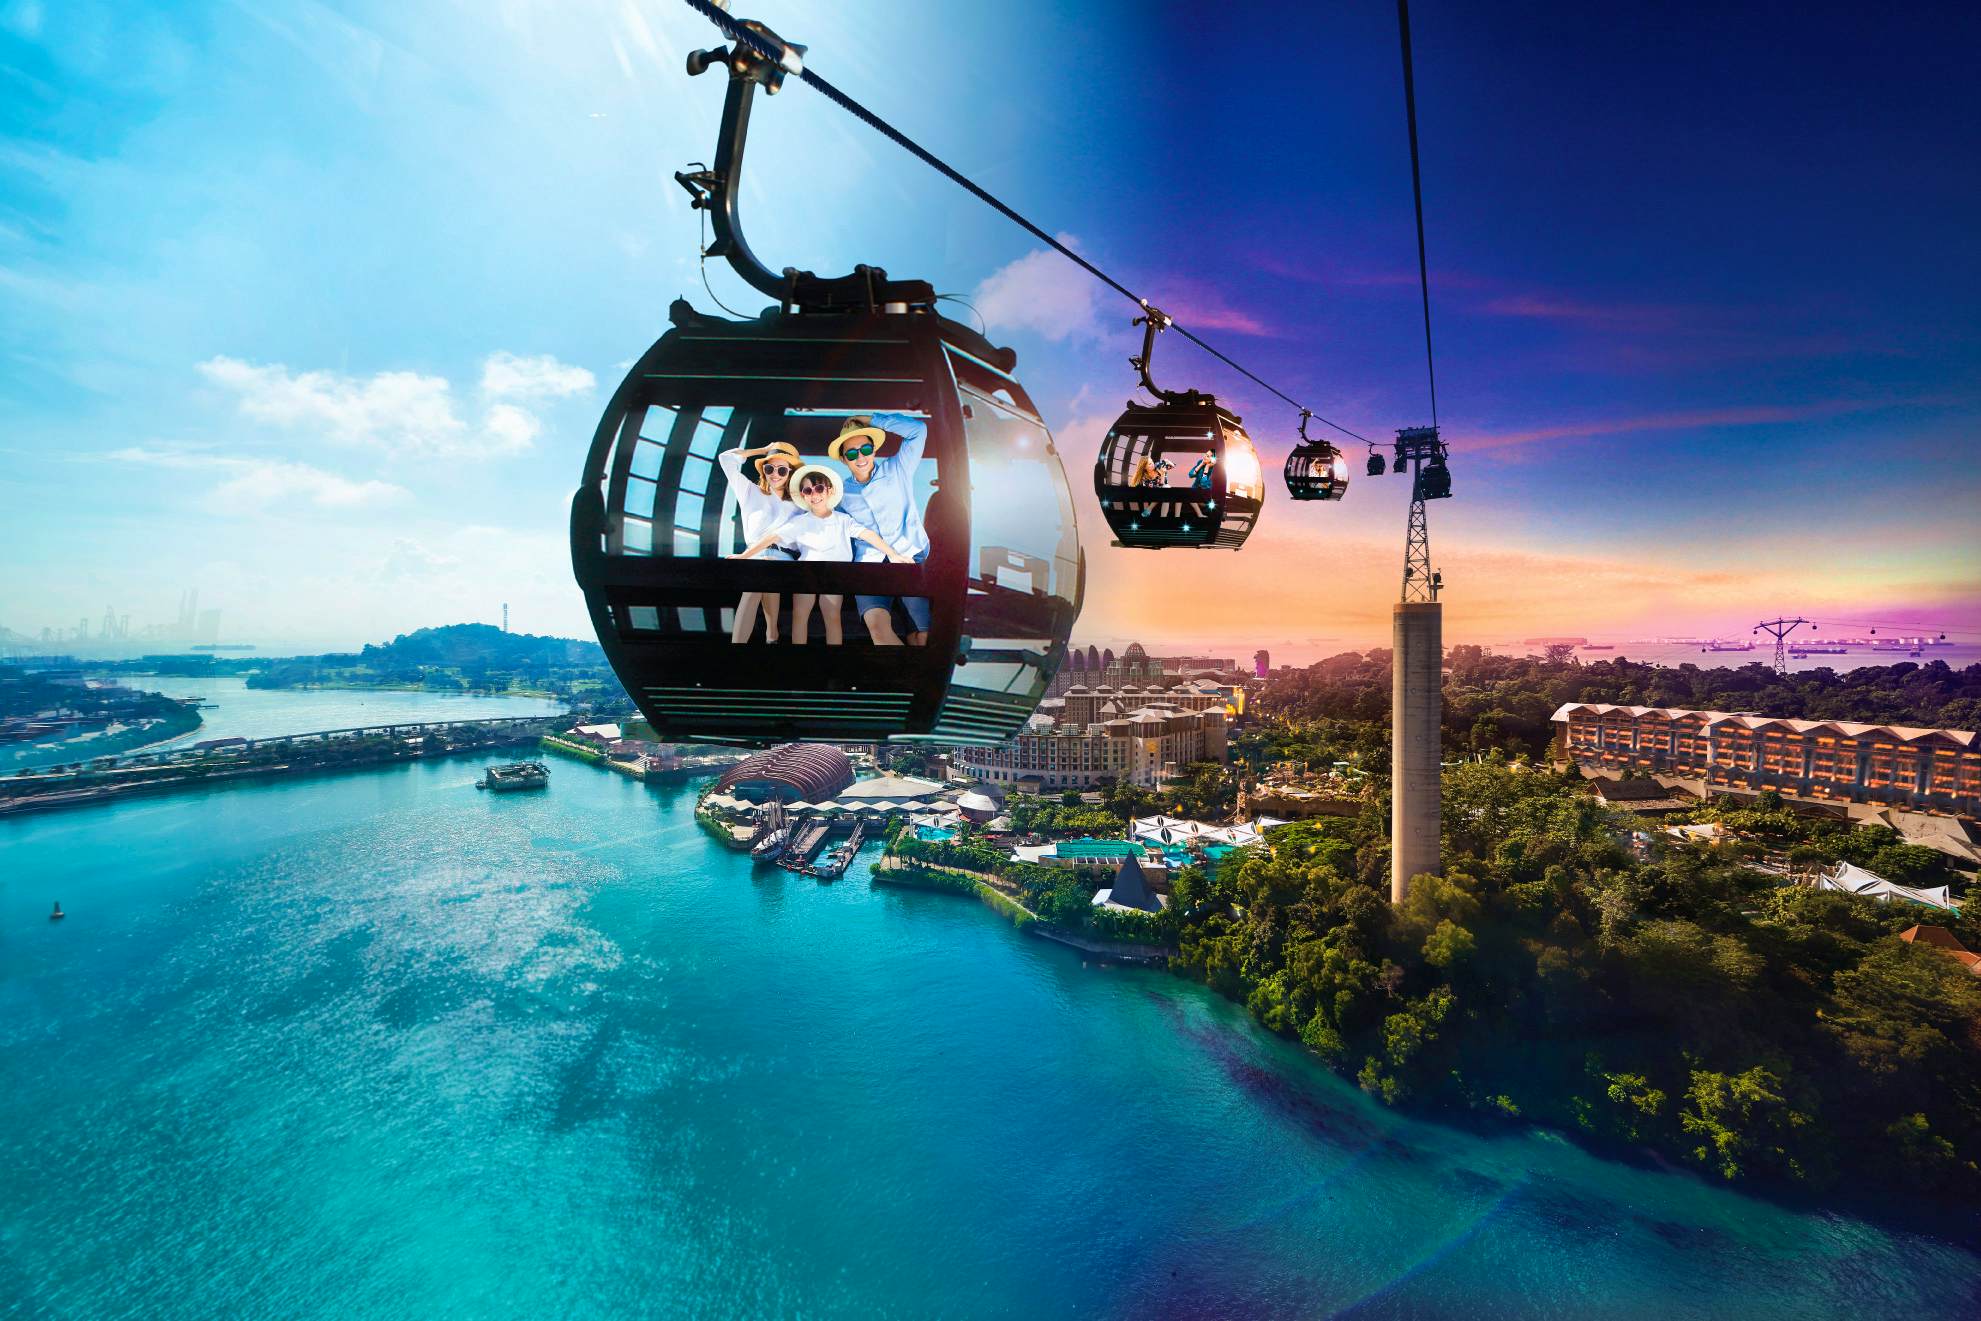 Sentosa - Cable Car (One way) ticket only